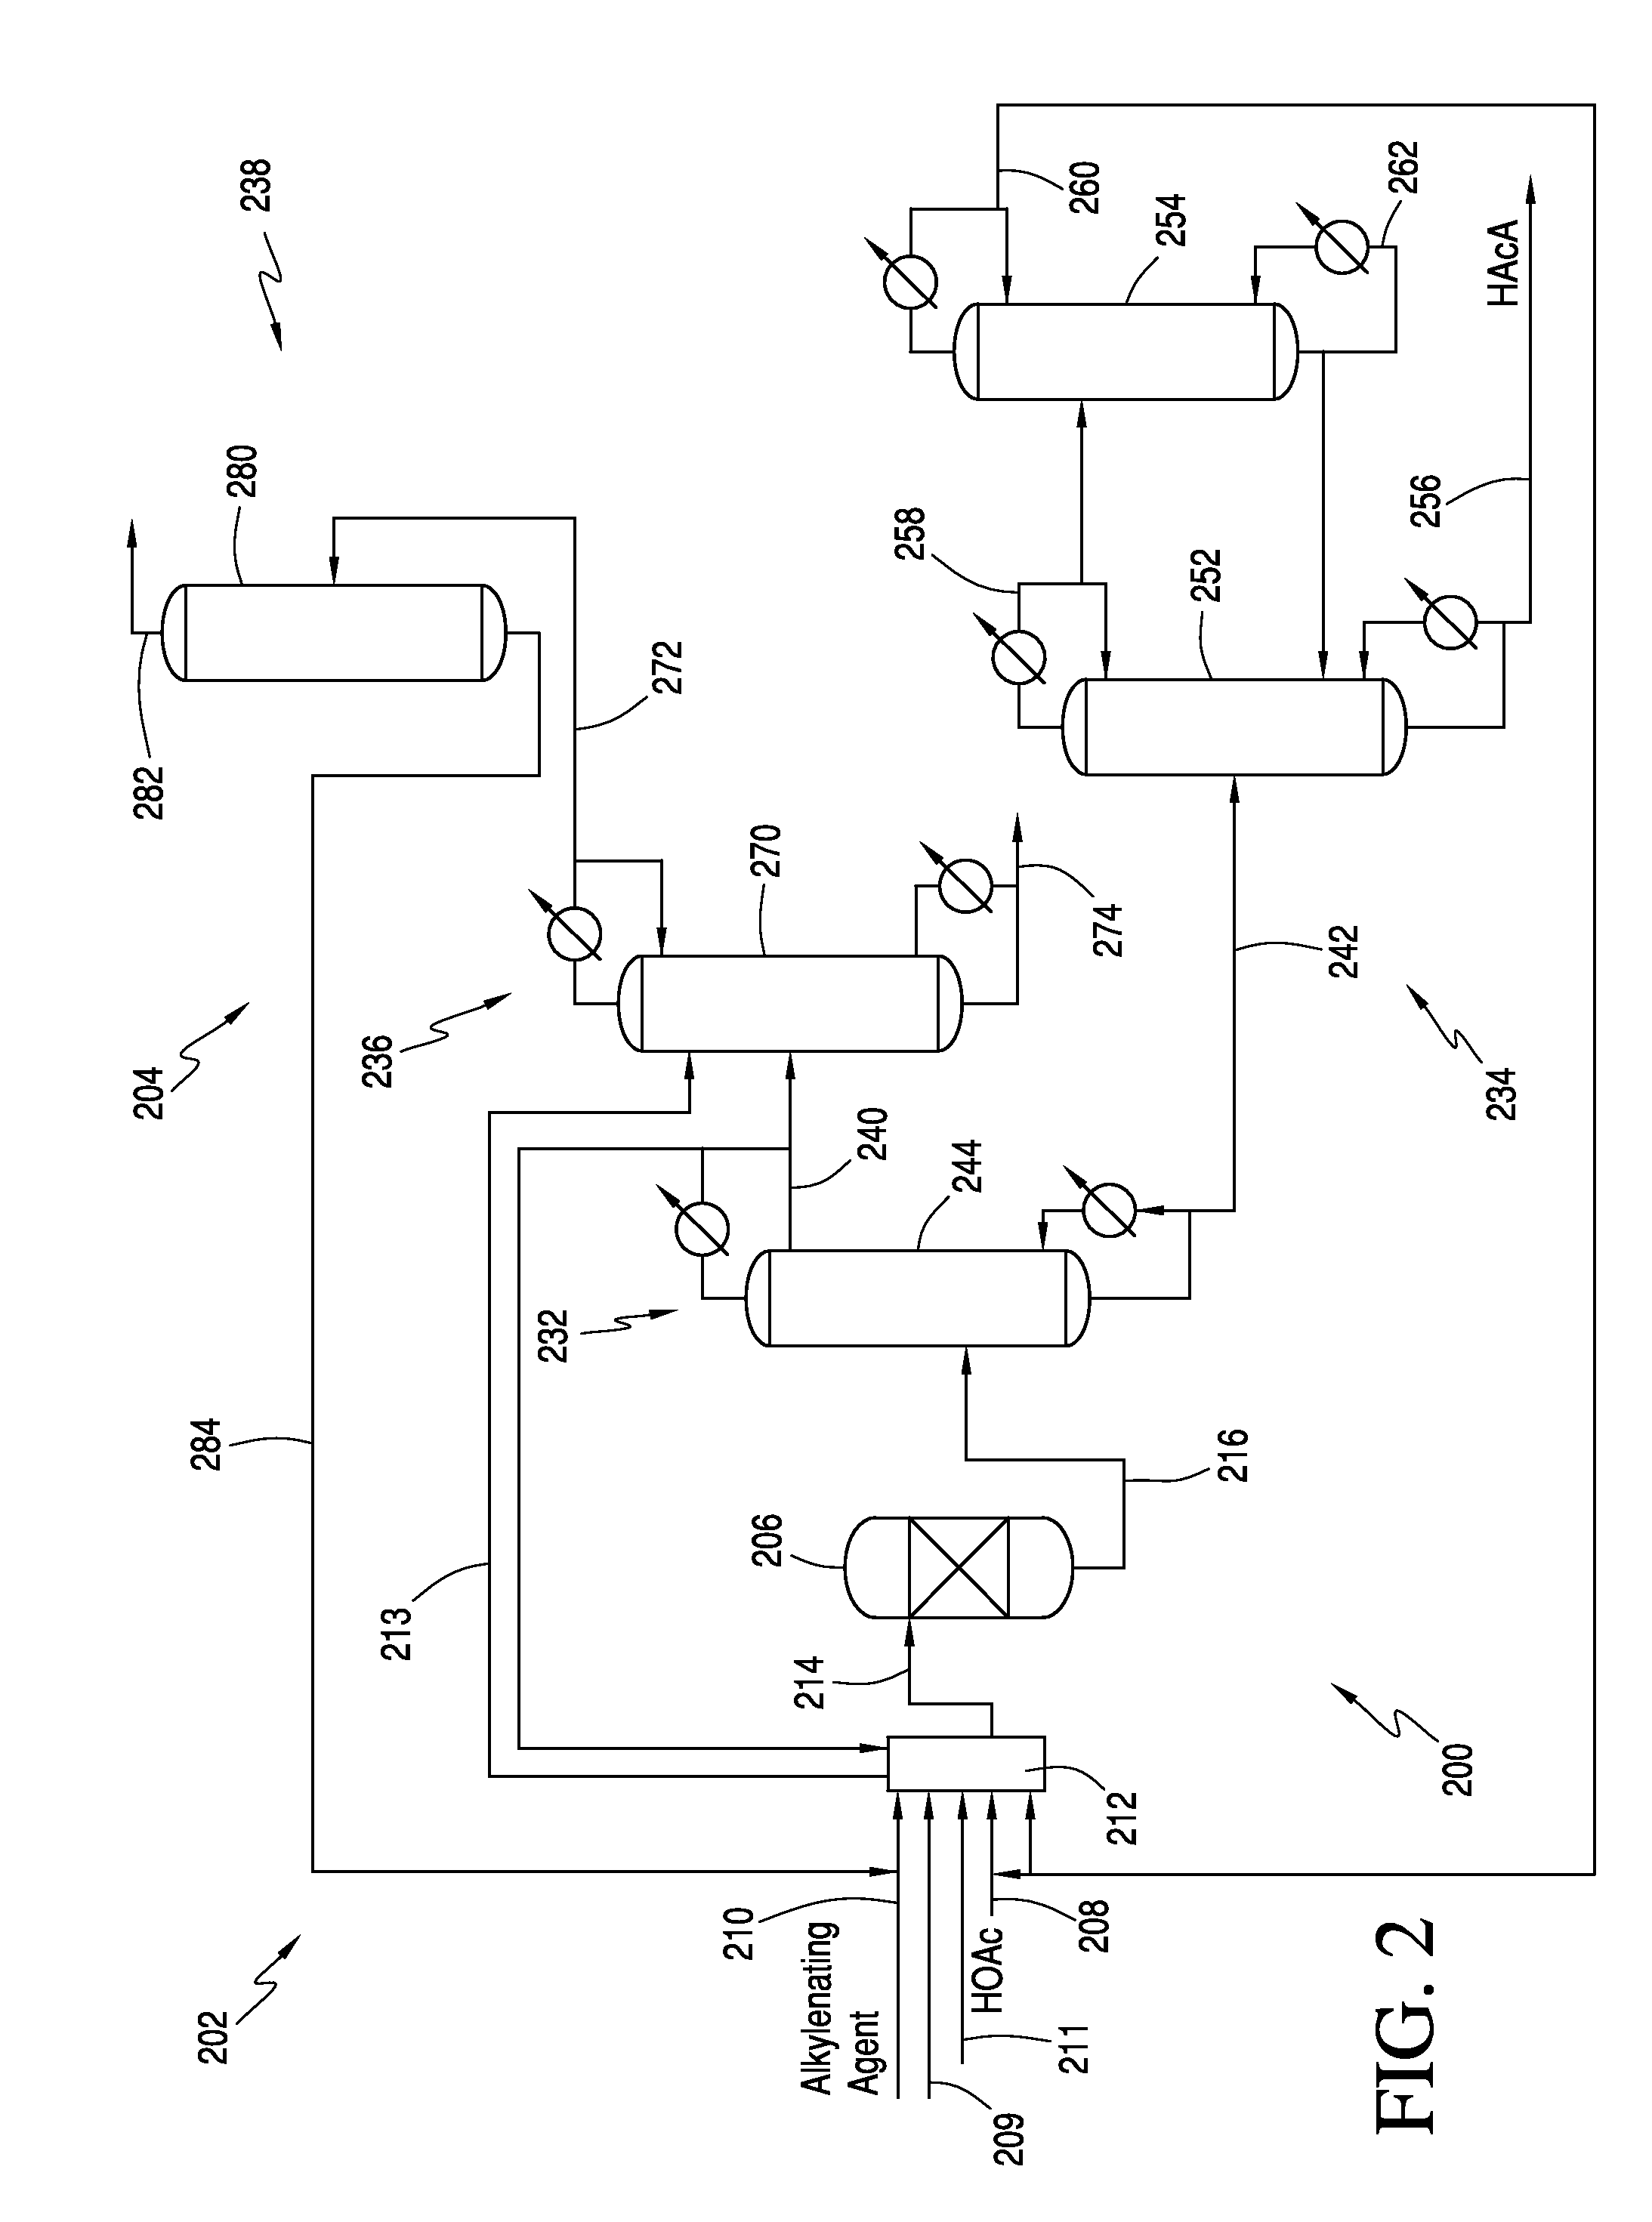 Processes for producing acrylic acids and acrylates